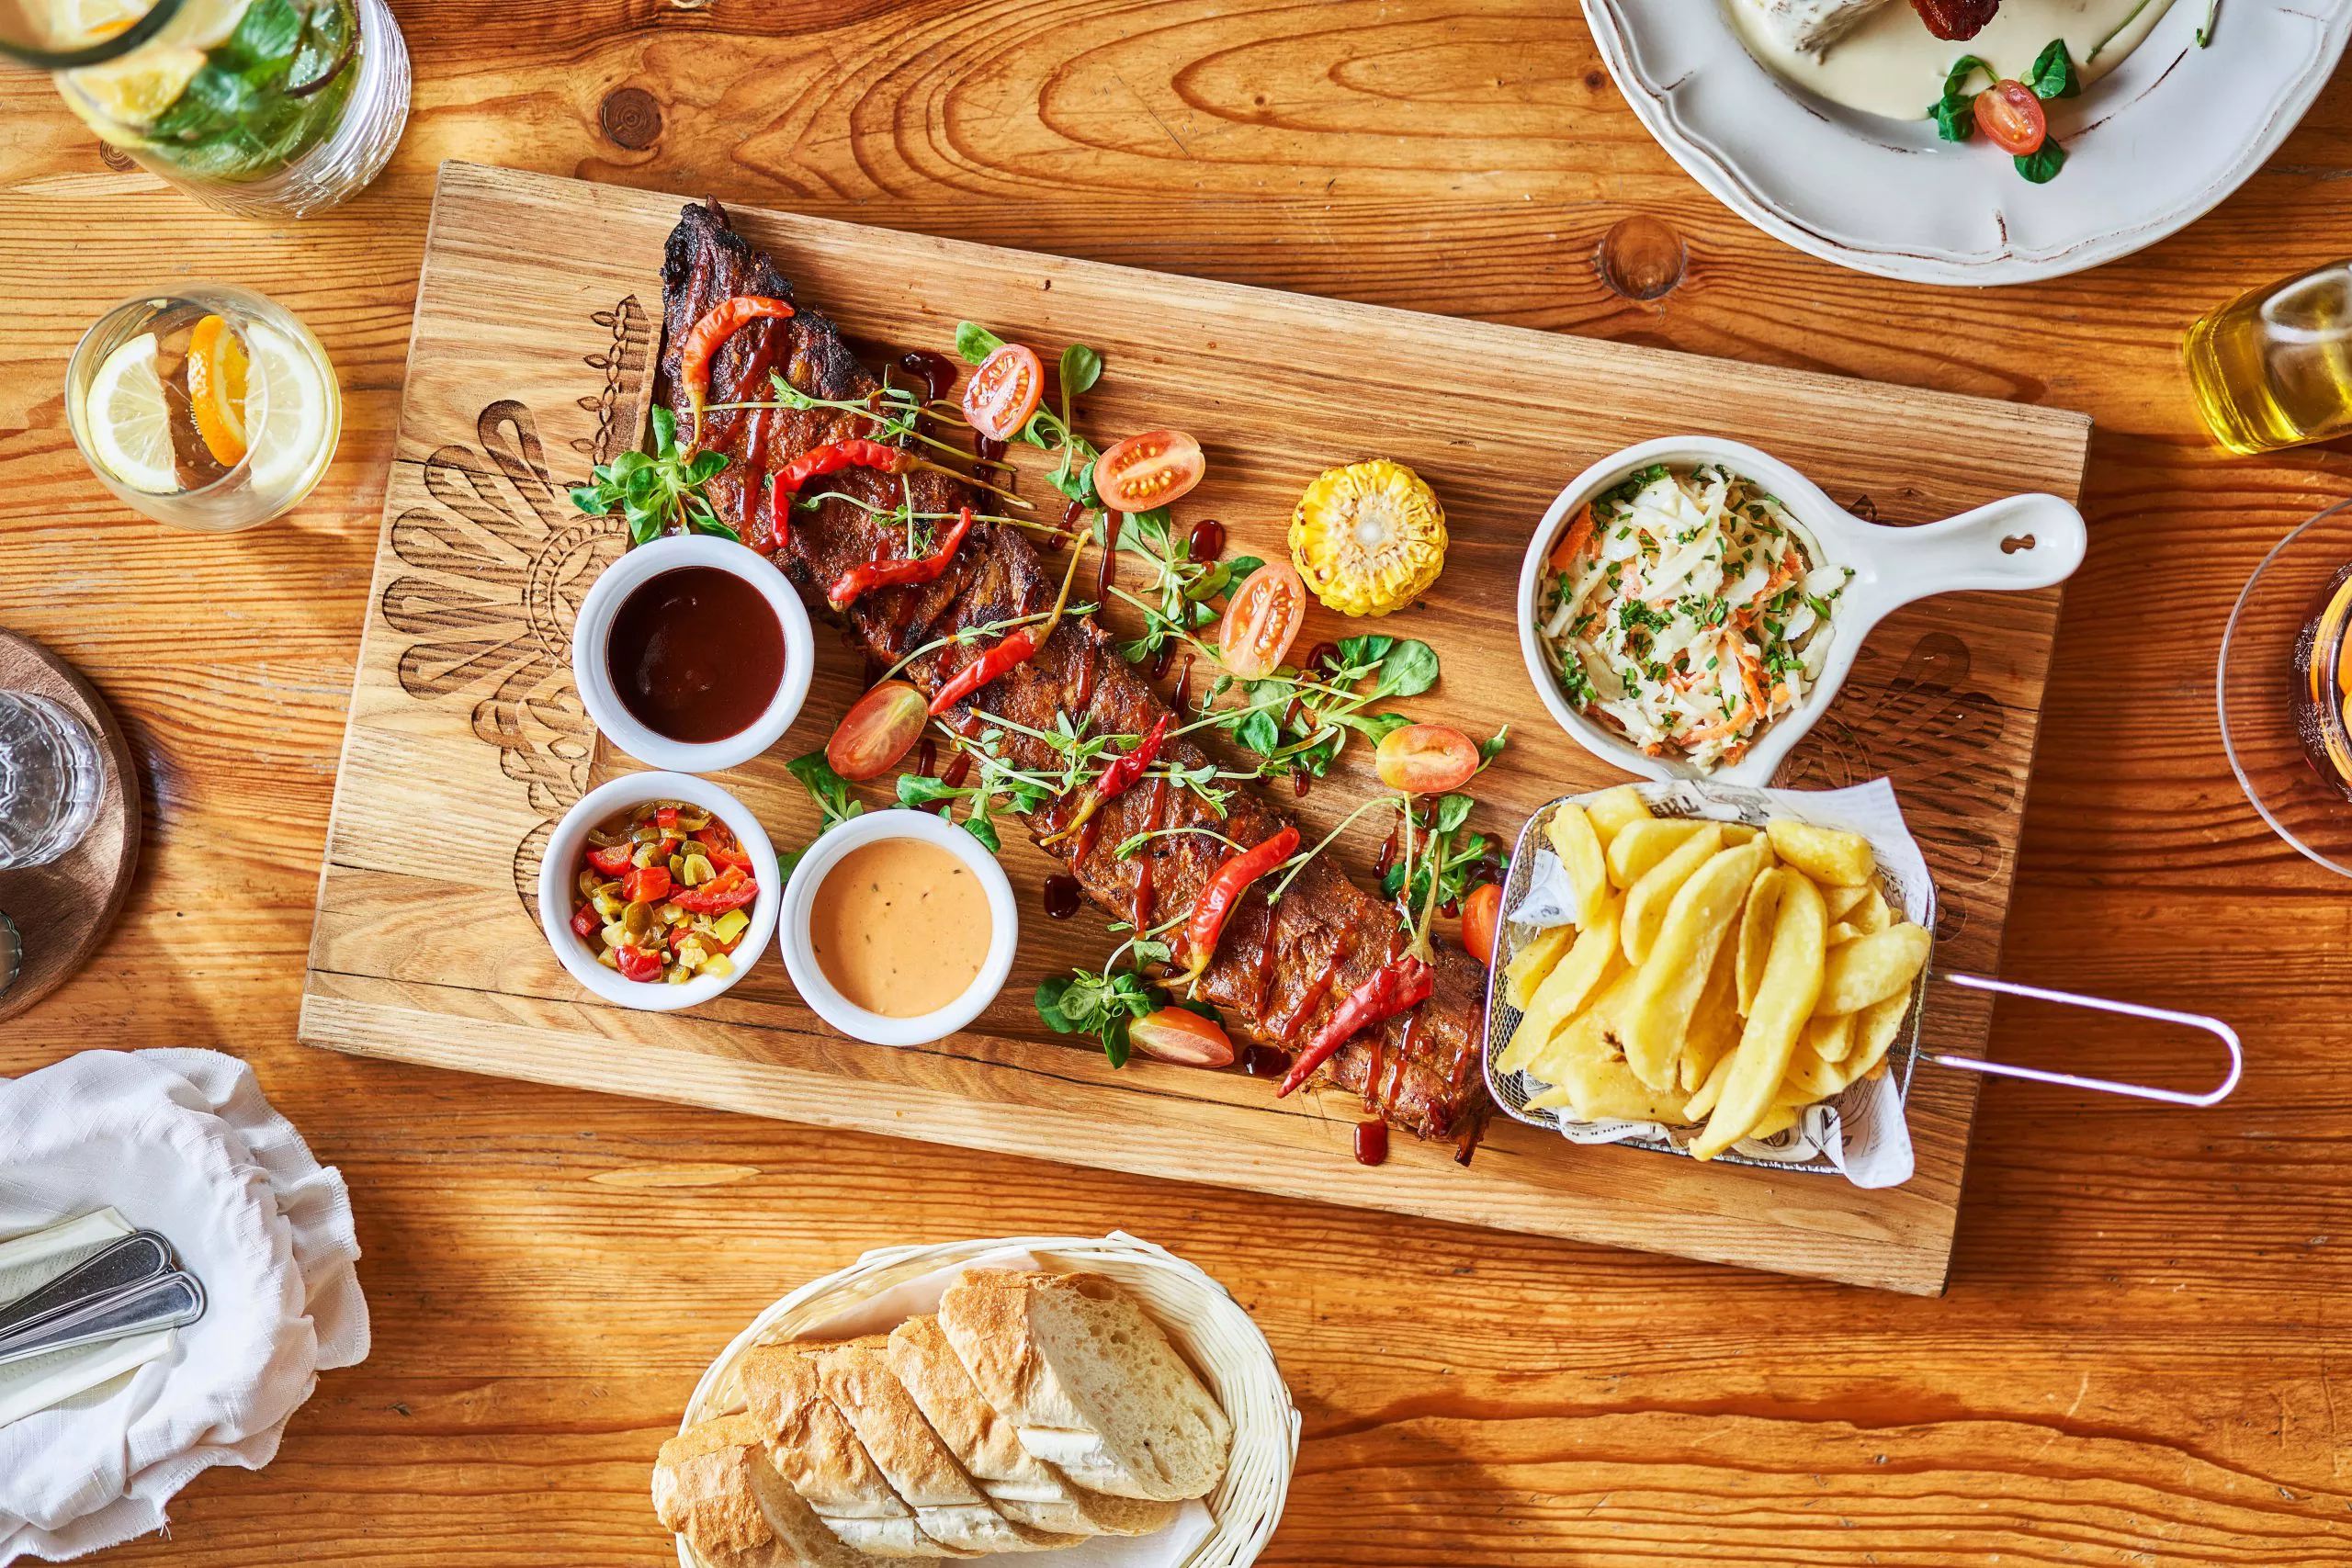 Top view of a wooden board with garnished spareribs, with sides and sauces; other dishes arranged around.